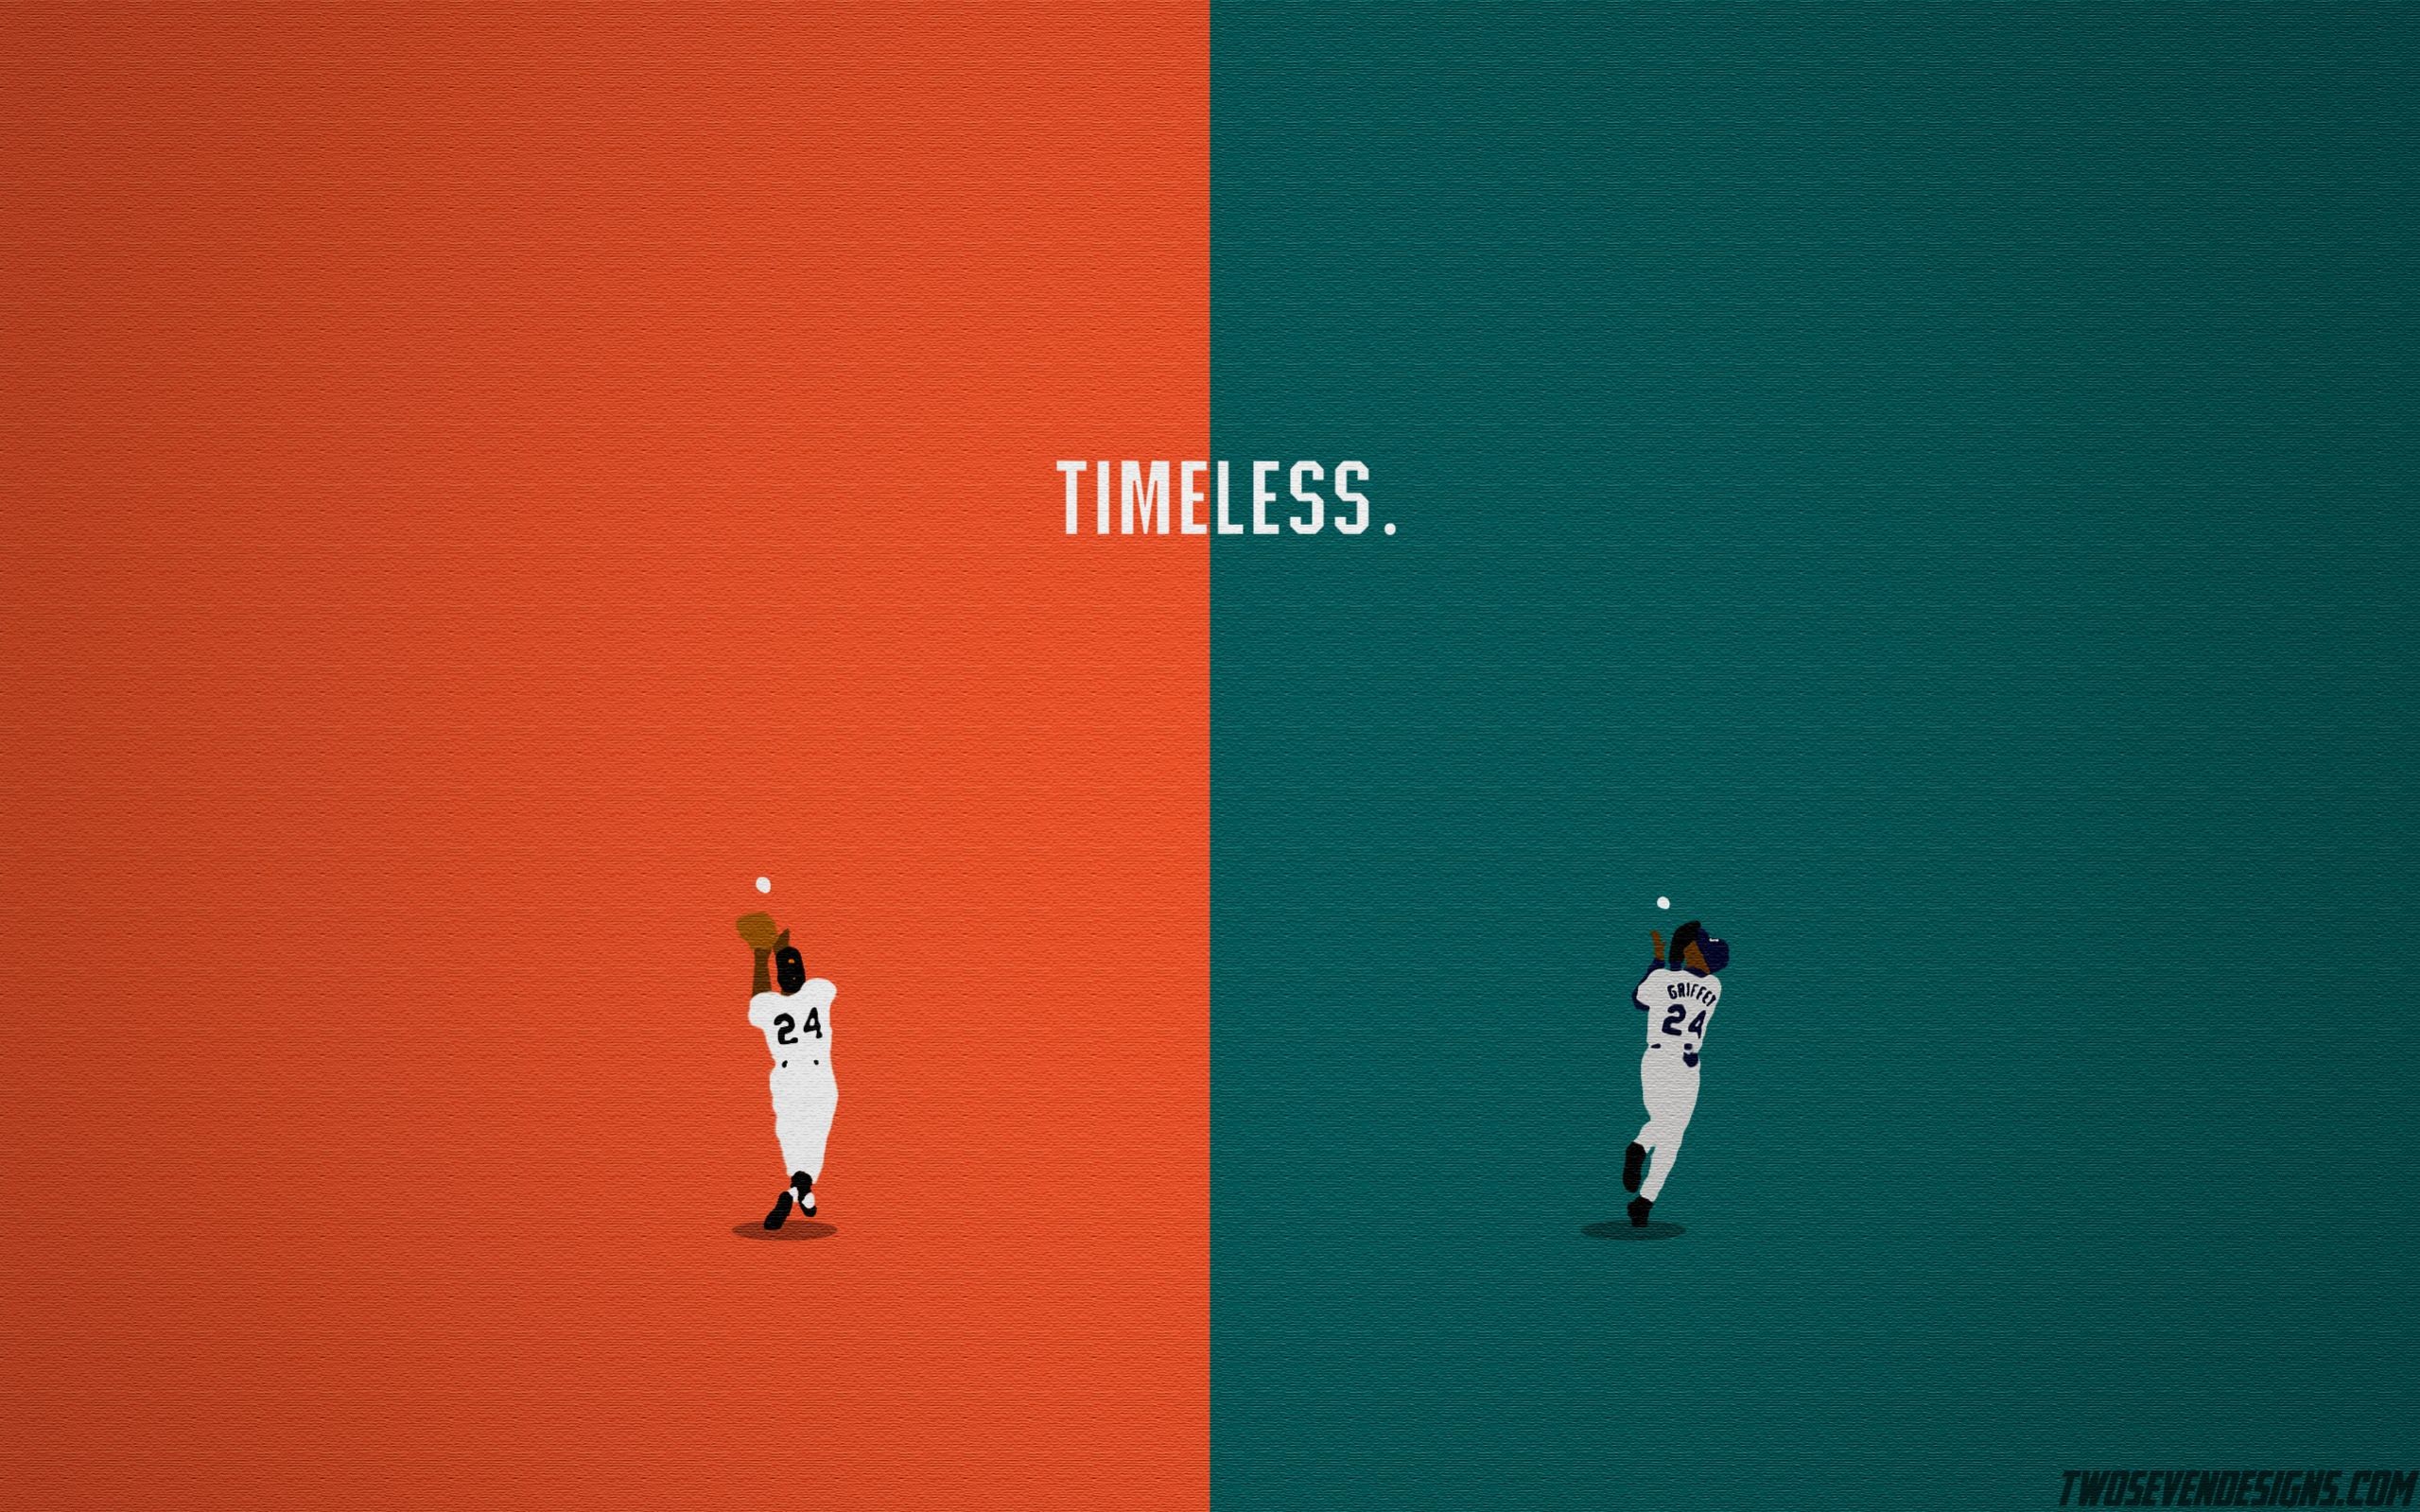 Started a new series of baseball wallpapersI couldnt wait to finish to show r / baseball the first one